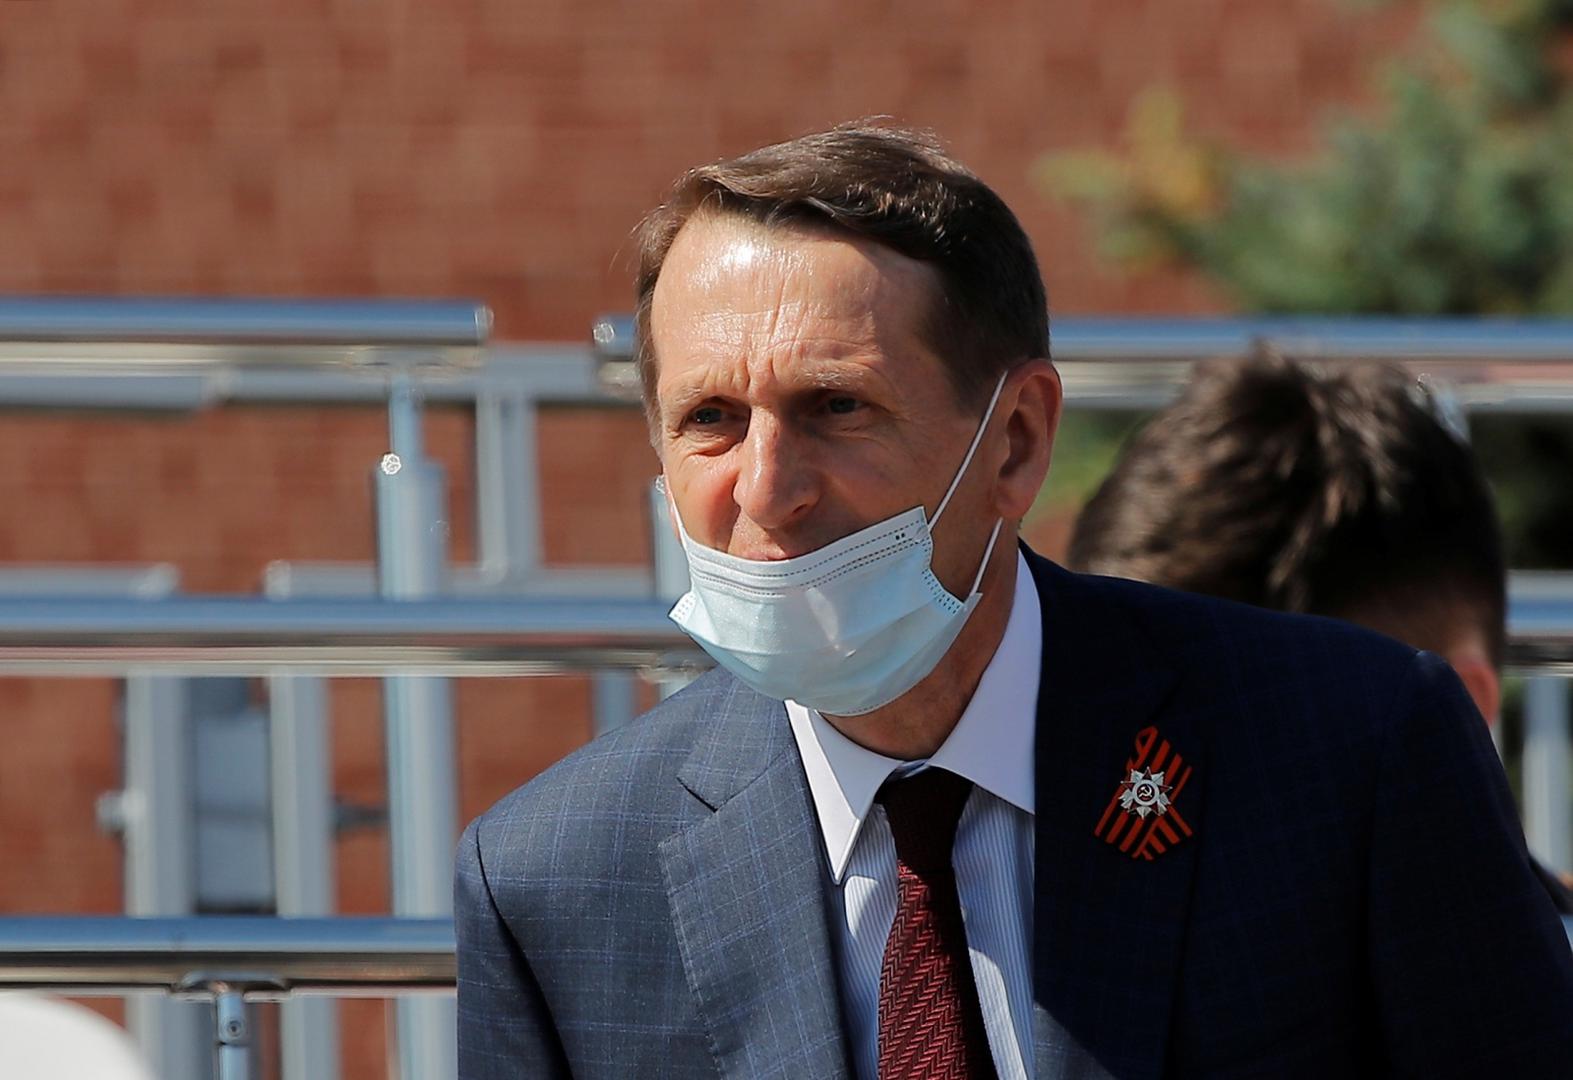 Victory Day Parade in Moscow Sergey Naryshkin, the head of Russia’s foreign intelligence agency, attends the Victory Day Parade in Red Square in Moscow, Russia June 24, 2020. The military parade, marking the 75th anniversary of the victory over Nazi Germany in World War Two, was scheduled for May 9 but postponed due to the outbreak of the coronavirus disease (COVID-19). REUTERS/Maxim Shemetov MAXIM SHEMETOV